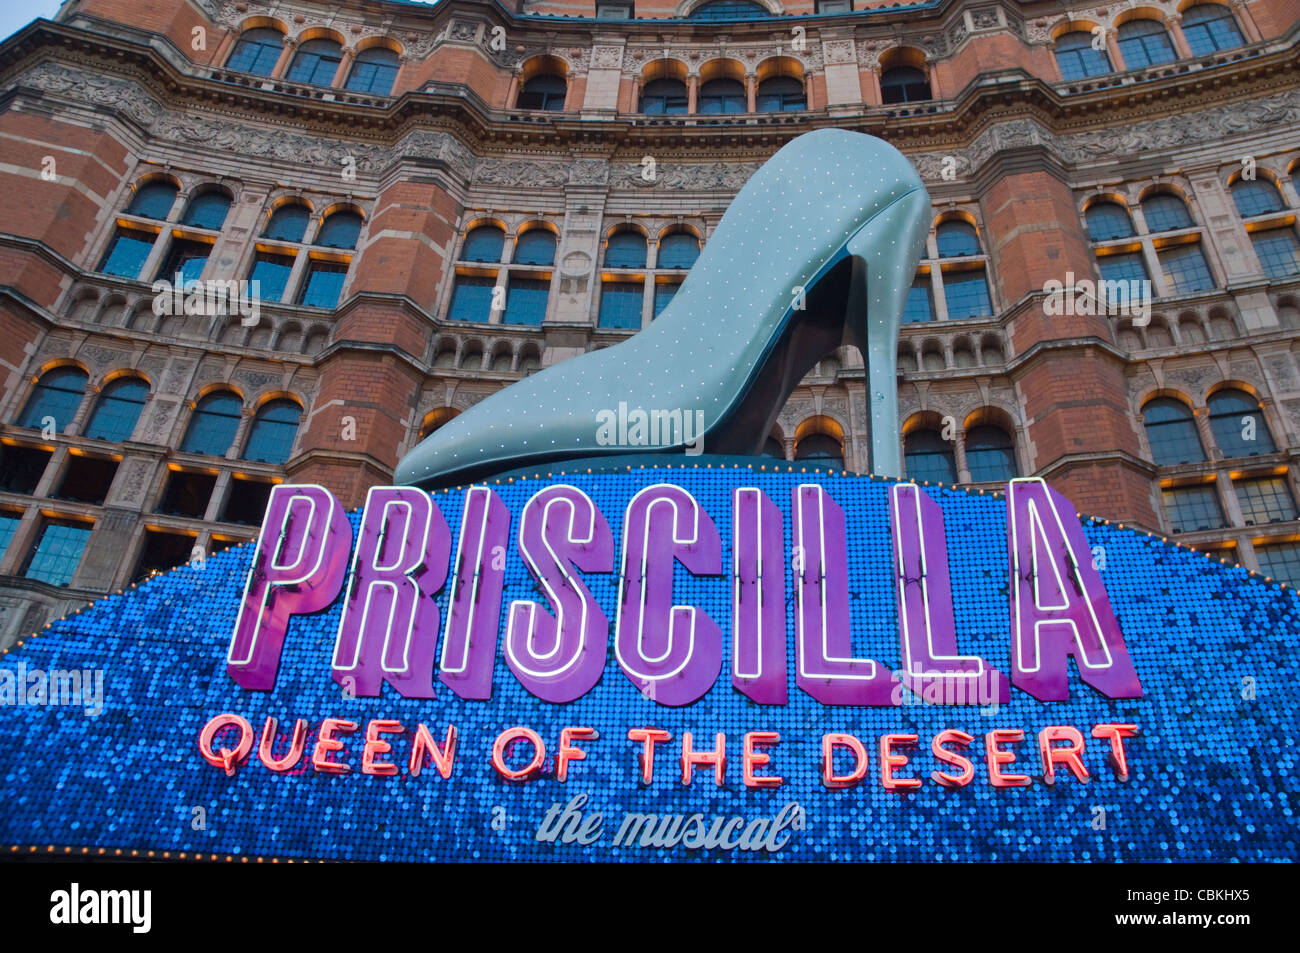 Palace Theatre exterior with Priscilla Queen of the Desert show advert Soho central London England UK Europe Stock Photo